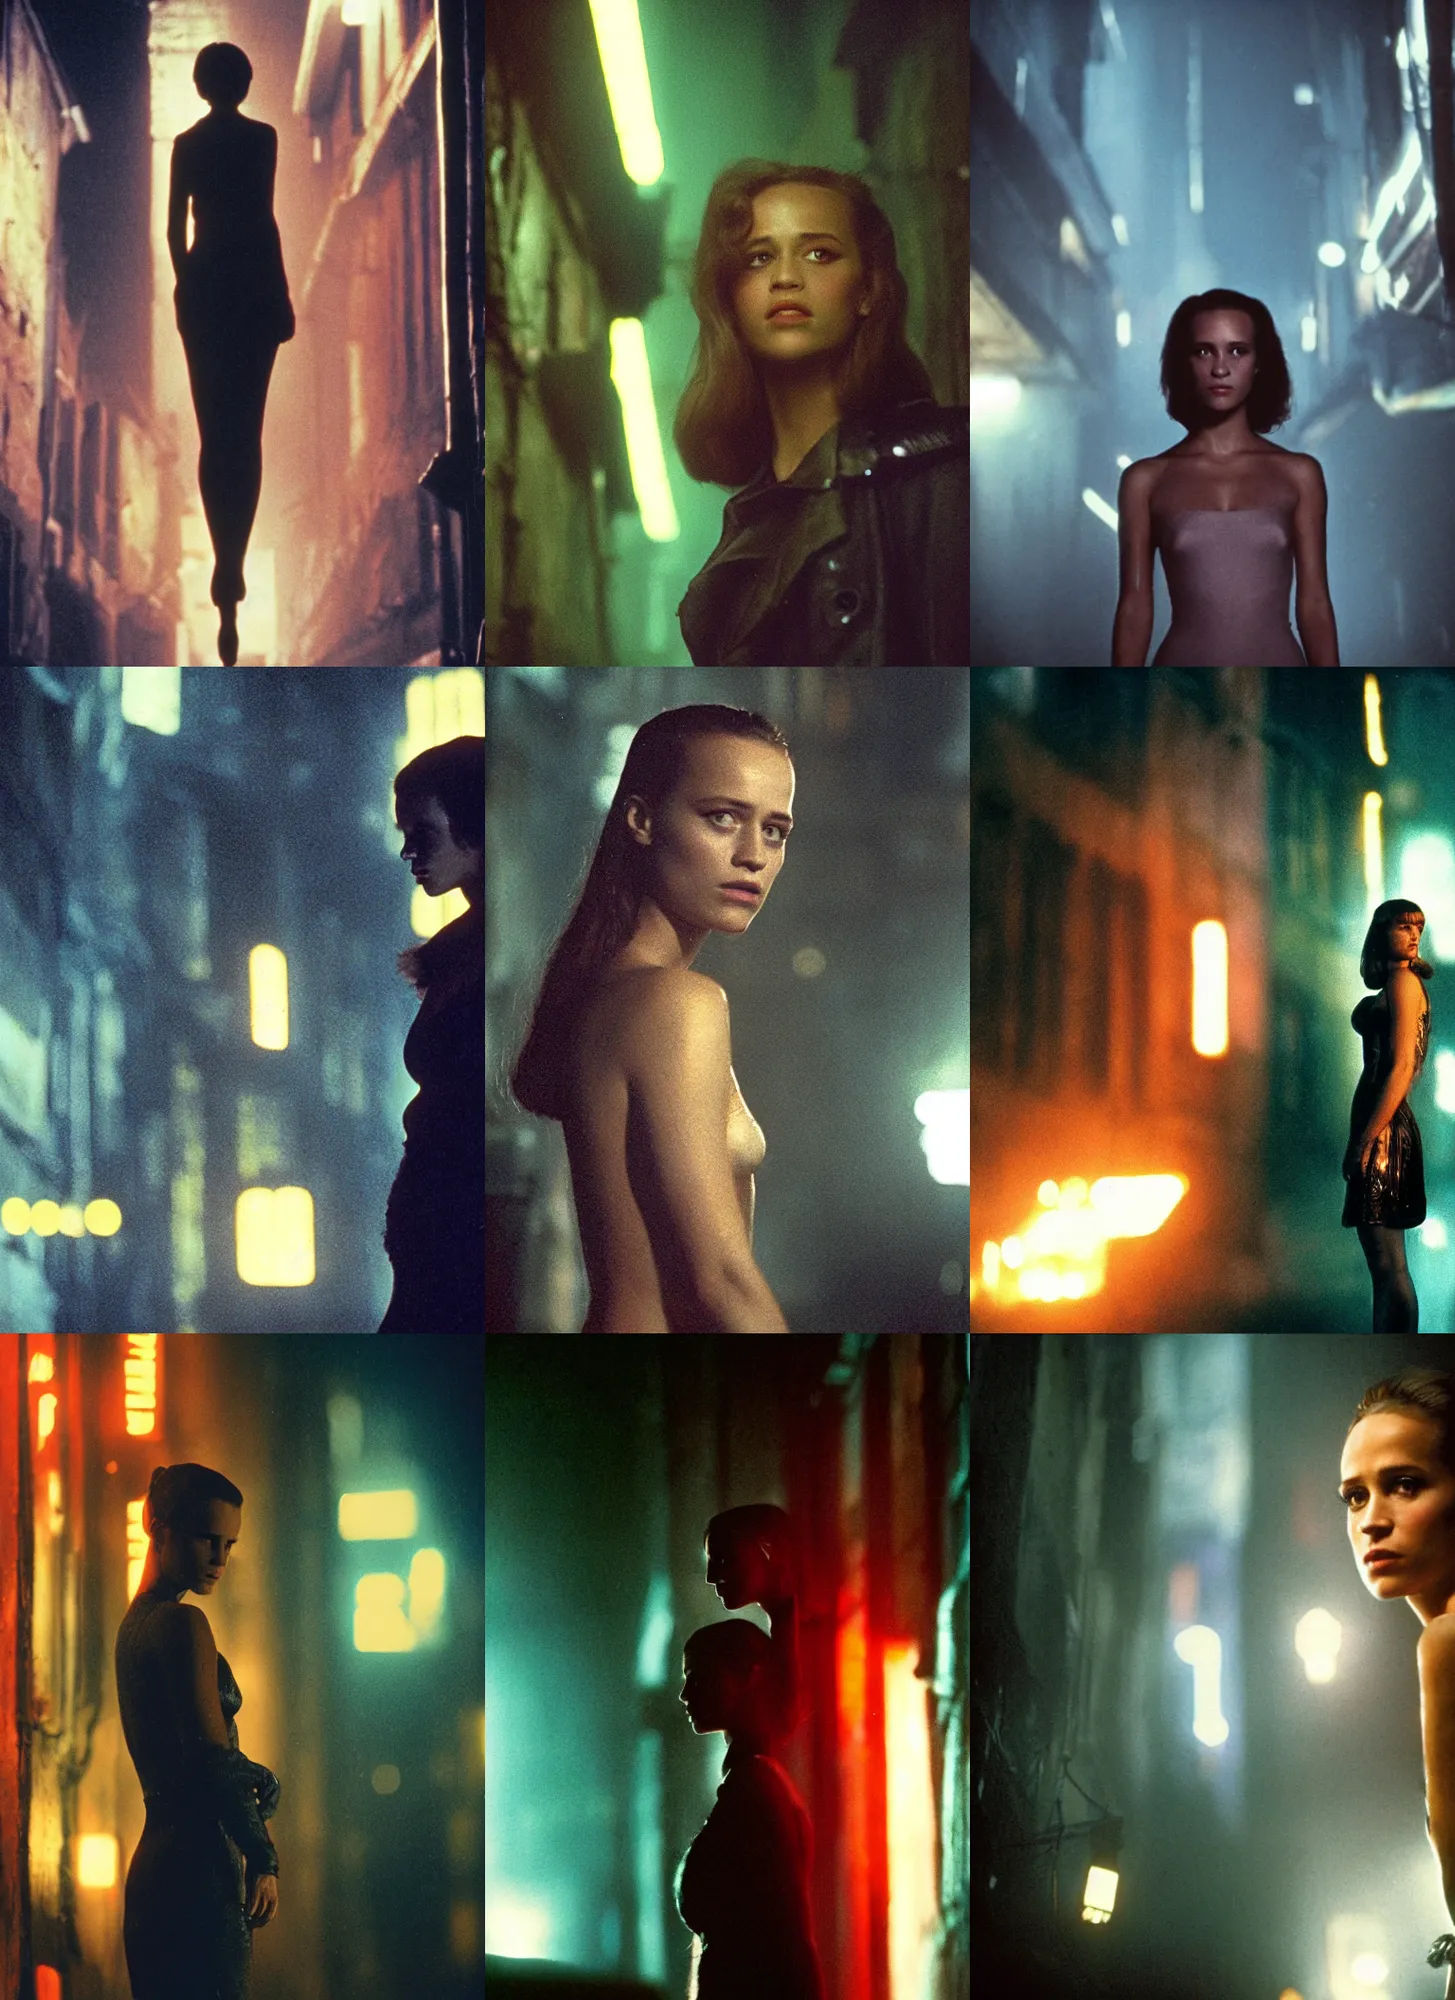 Prompt: A close-up, color outdoor film still of a Alicia Amanda Vikander standing on the dark alleyway, ambient lighting at night, from Blade Runner(1982).